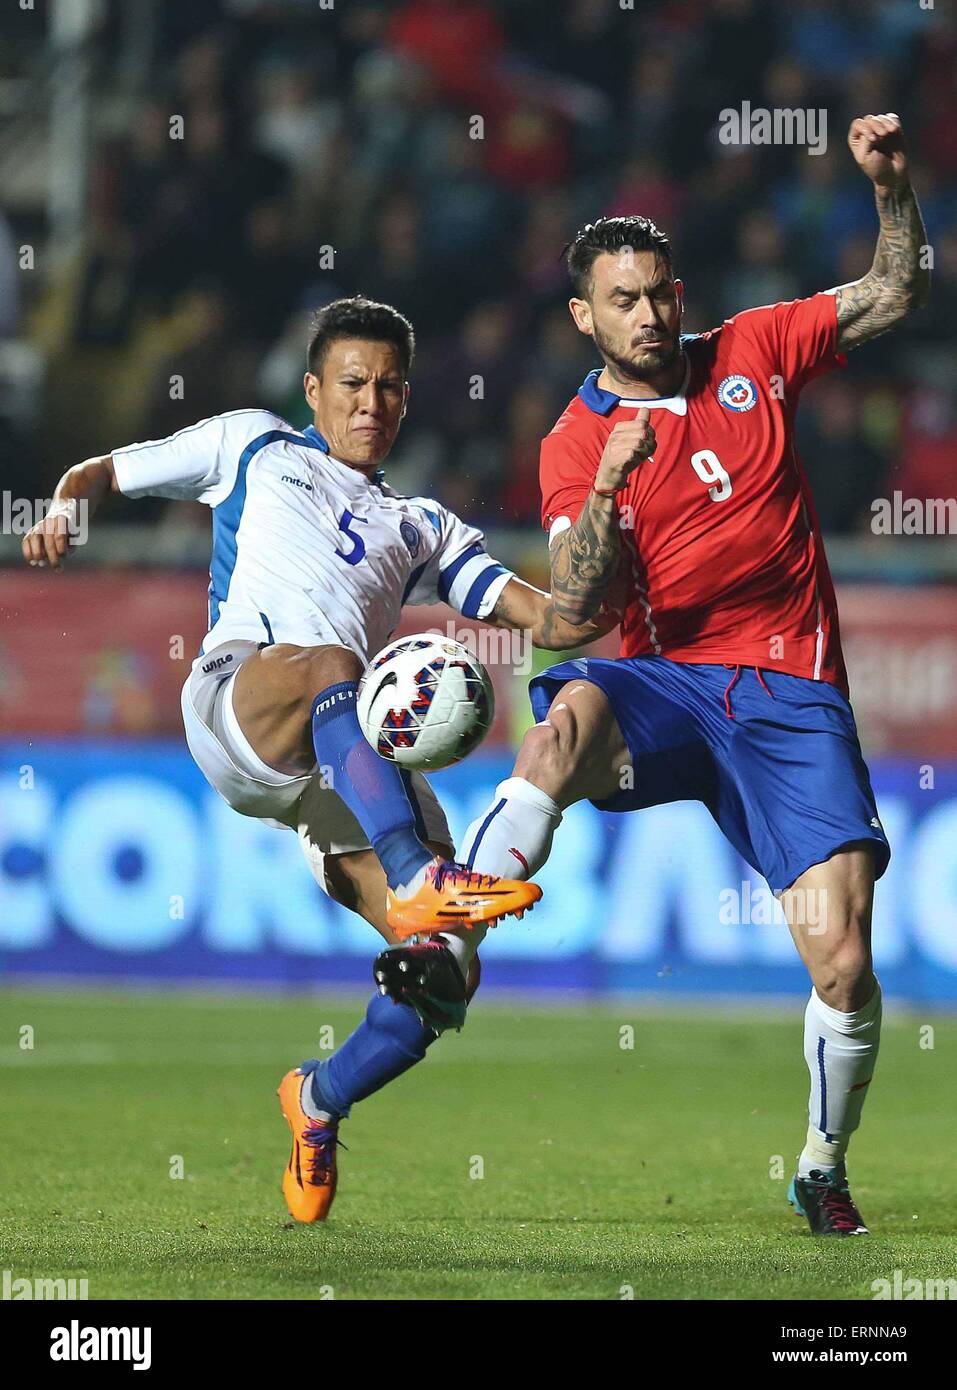 Rancagua, Chile. 5th June, 2015. Image provided by Chile's National Association of Professional Soccer (ANFP) shows Chile's Mauricio Pinilla (R) vying with El Salvador's Alexander Mendoza during a friendly match at the El Teniente Stadium in Rancagua, Chile, on June 5, 2015. Credit:  ANFP/Xinhua/Alamy Live News Stock Photo